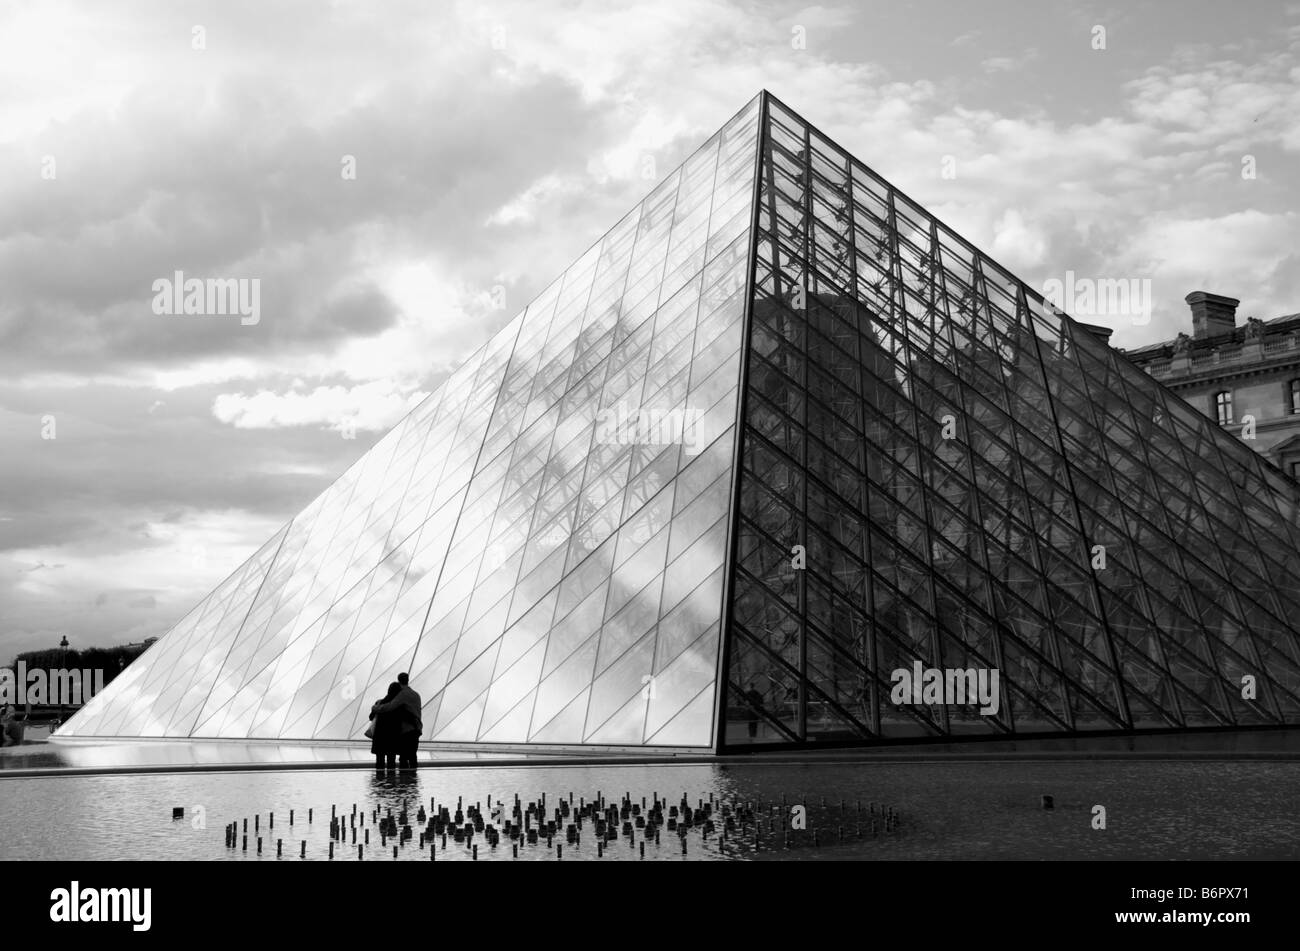 Louvre Museum, the Pyramid by the architect Ieoh Ming Pei, Paris, France, Europe Stock Photo